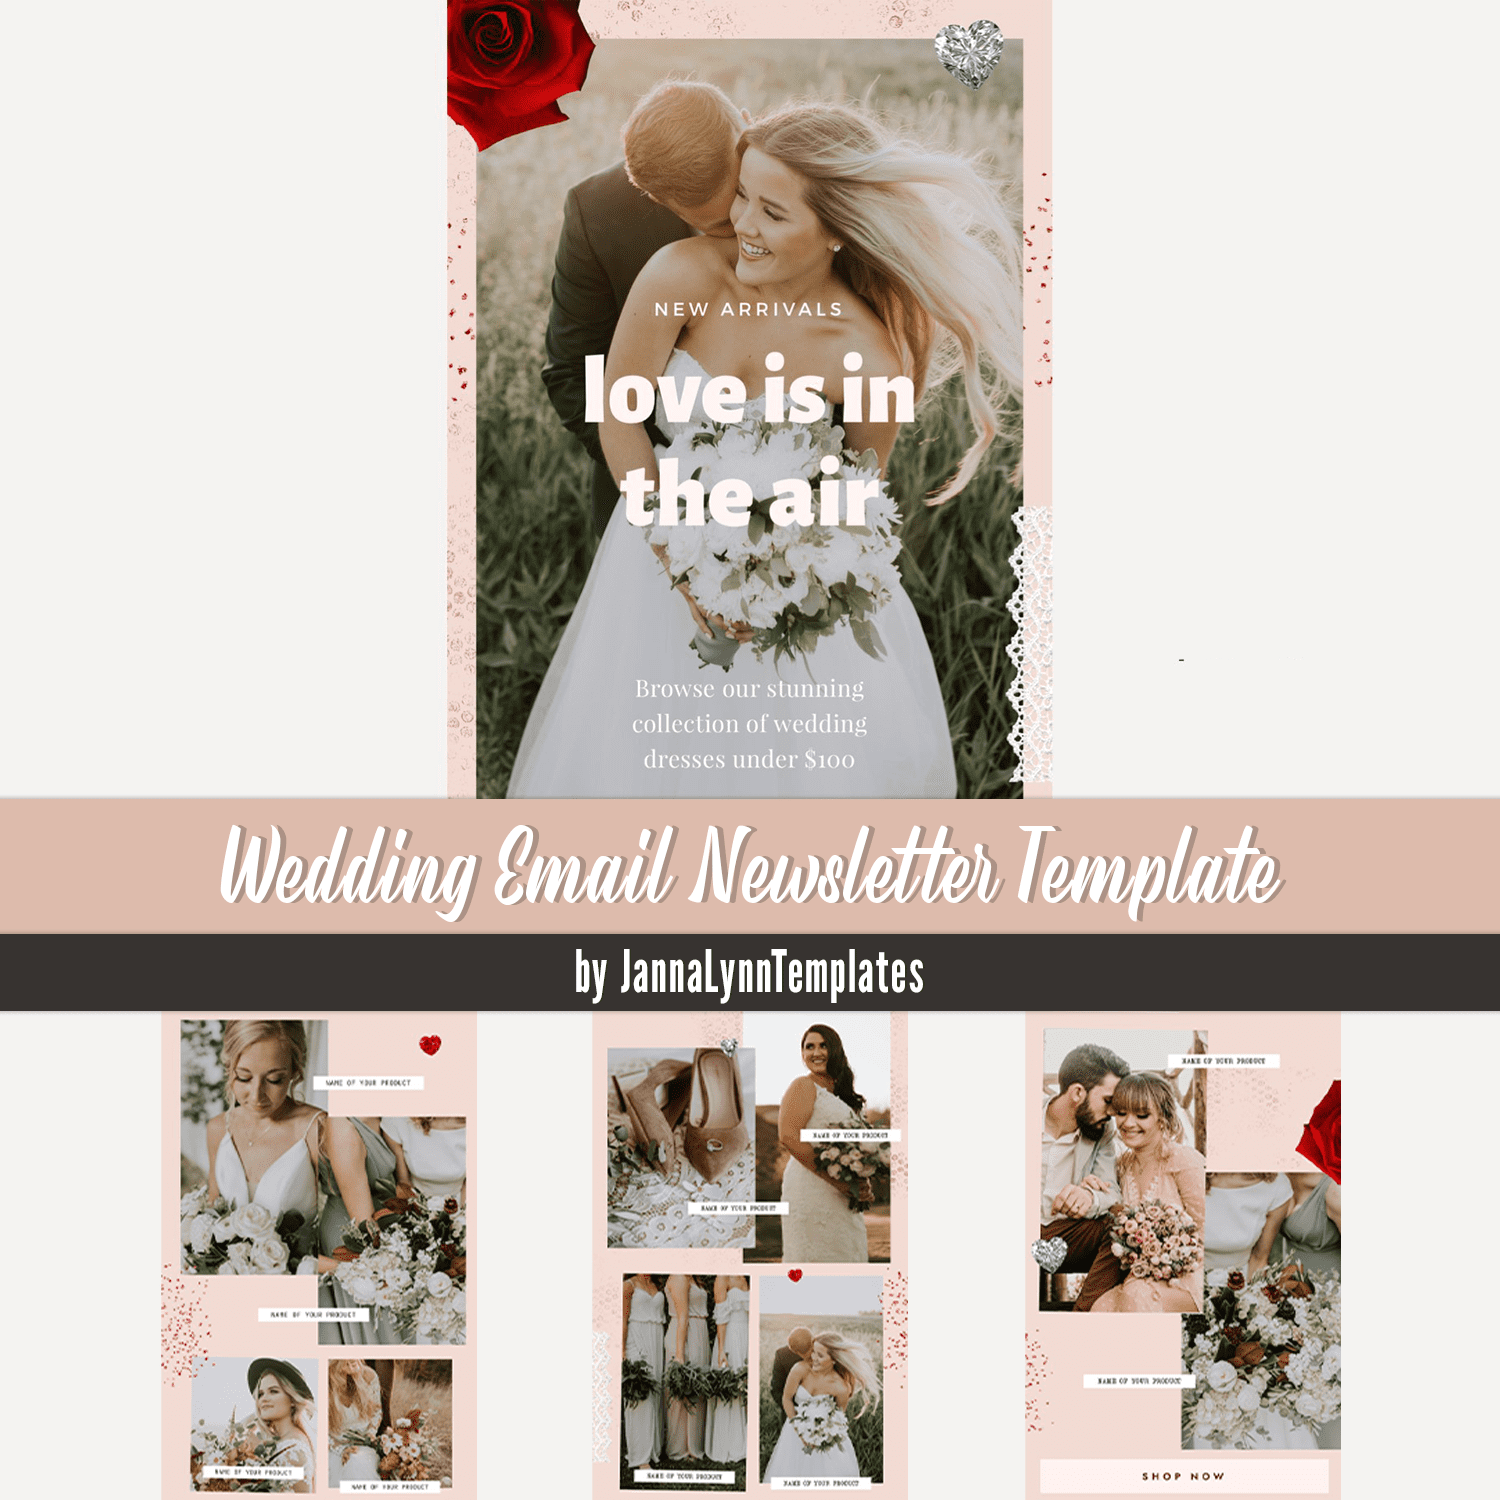 Set of images of charming wedding email newsletter template.